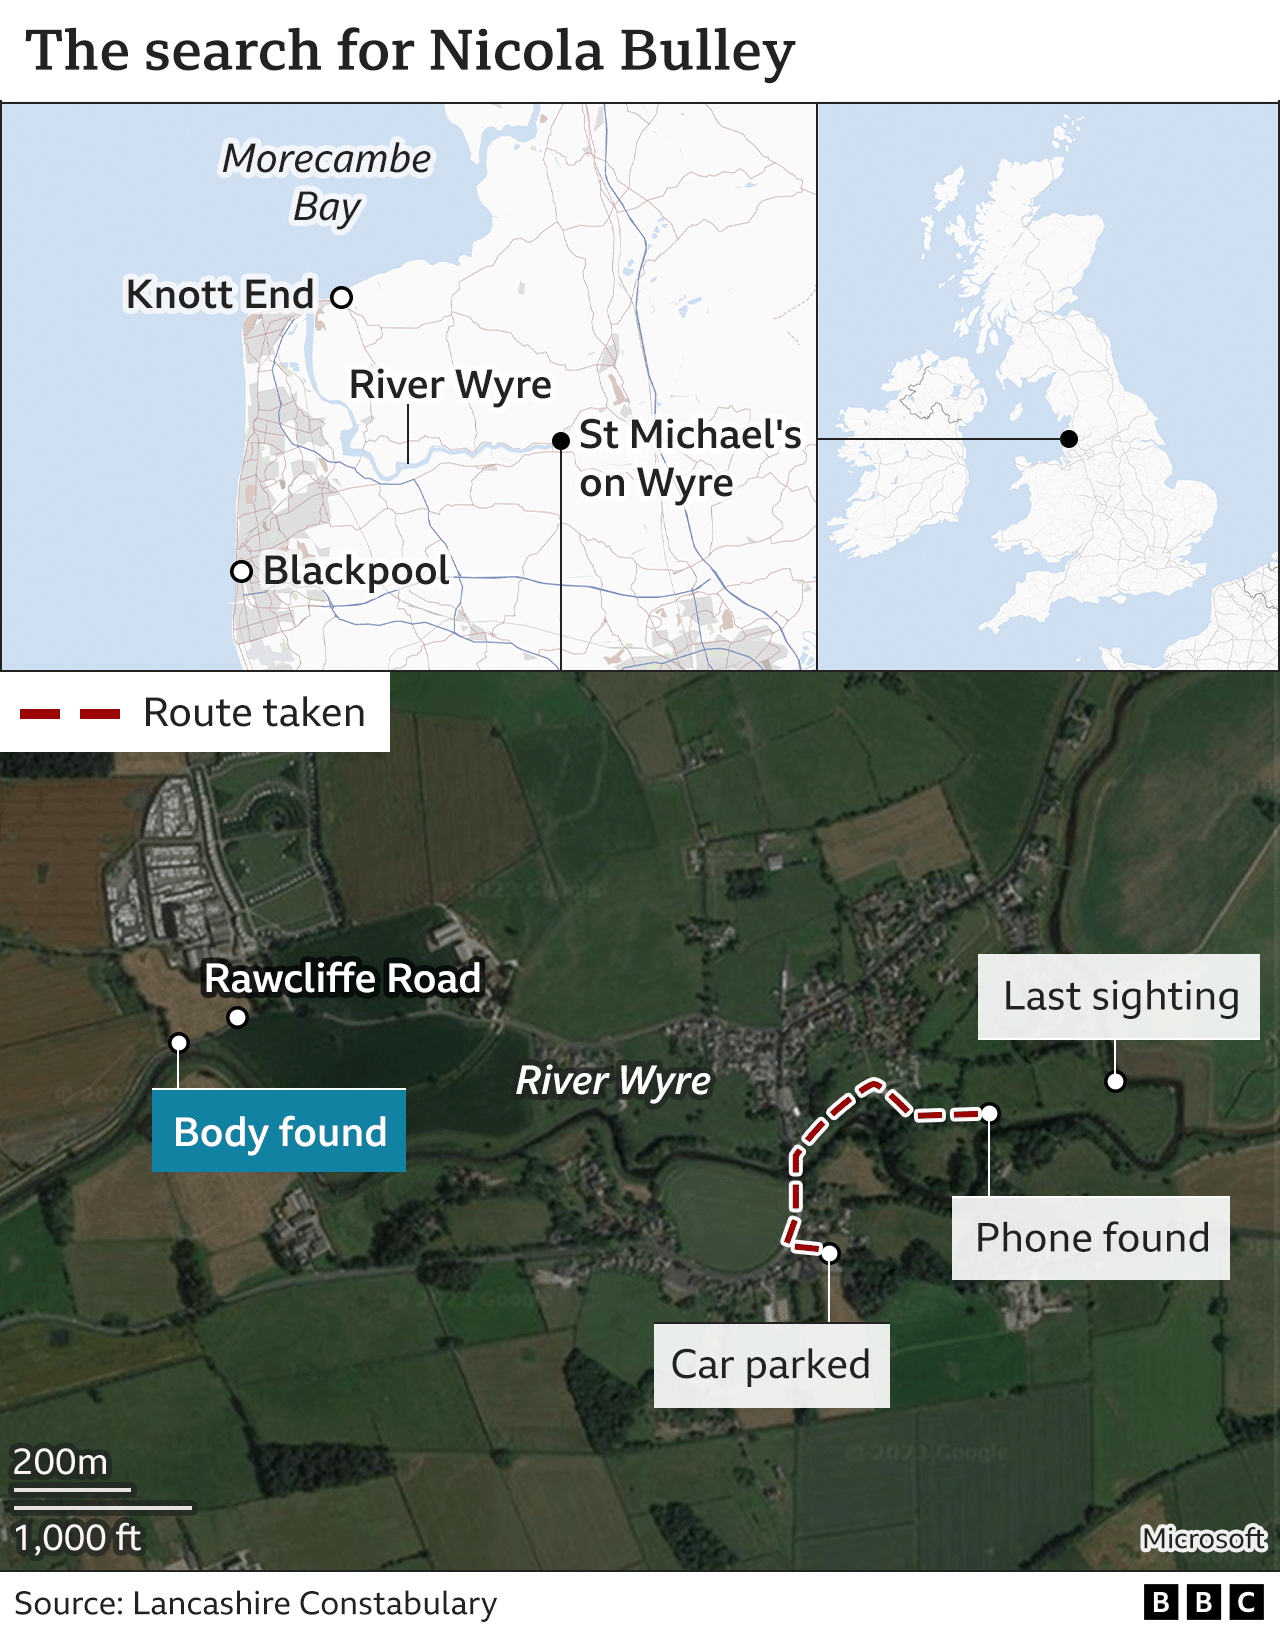 Map showing the route Nicola Bulley is thought to have taken after she parked her car and walked along the river path; and also the location of the body found by police